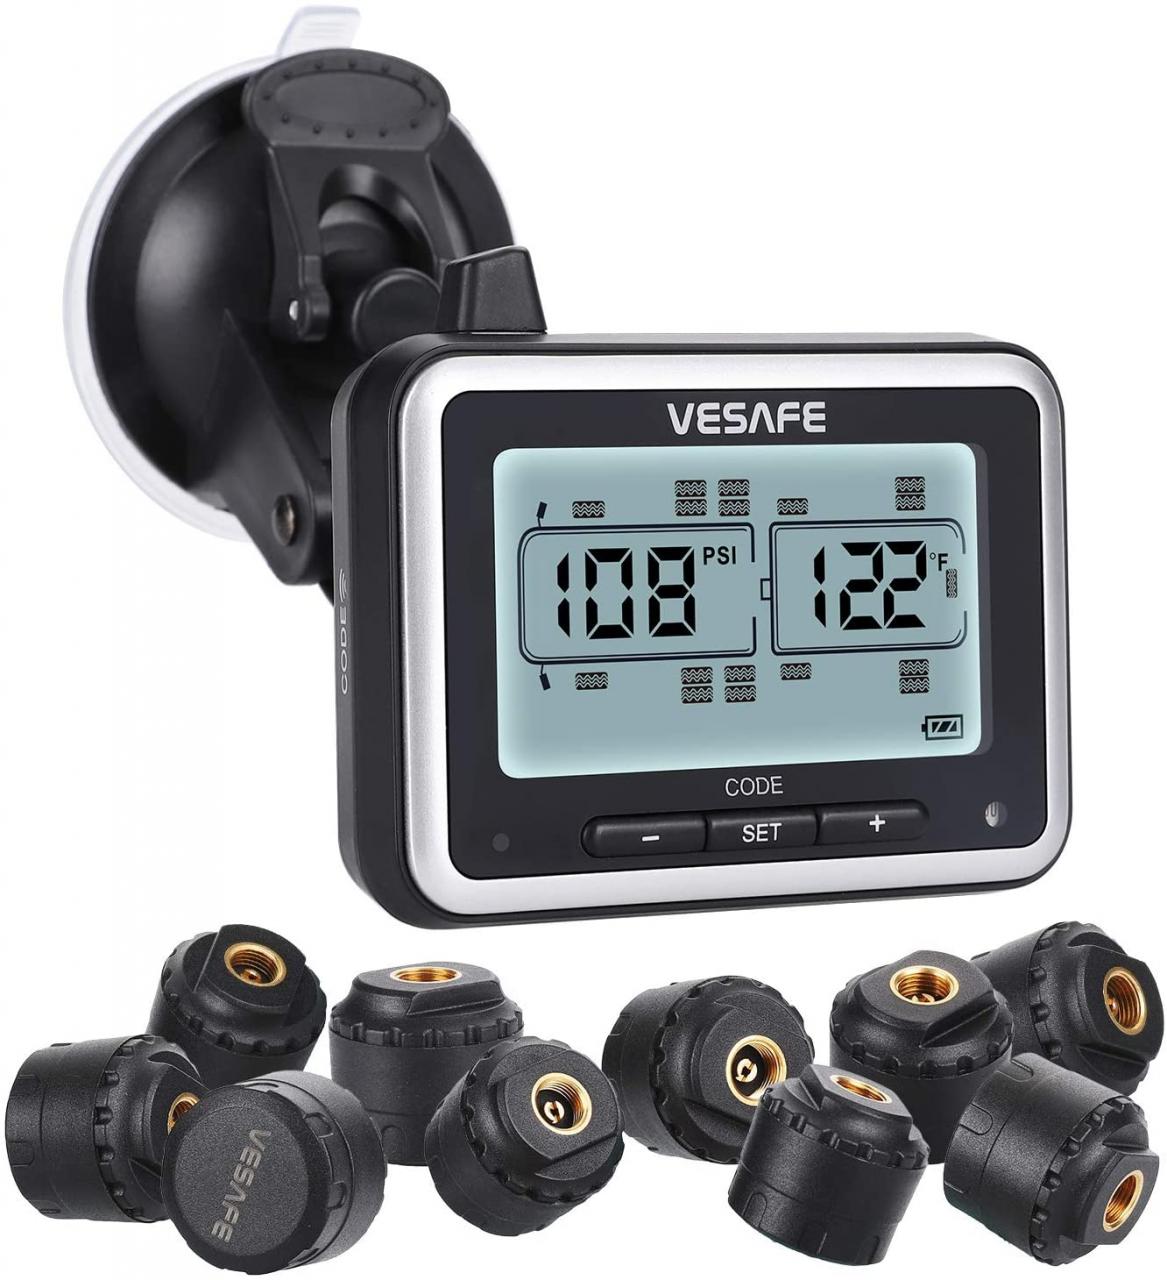 Buy Vesafe Wireless Tire Pressure Monitoring System (TPMS) for RV, Trailer,  Coach, Motor Home, Fifth Wheel, with 10 Anti-Theft sensors Online in  Taiwan. B085LHRL6Q